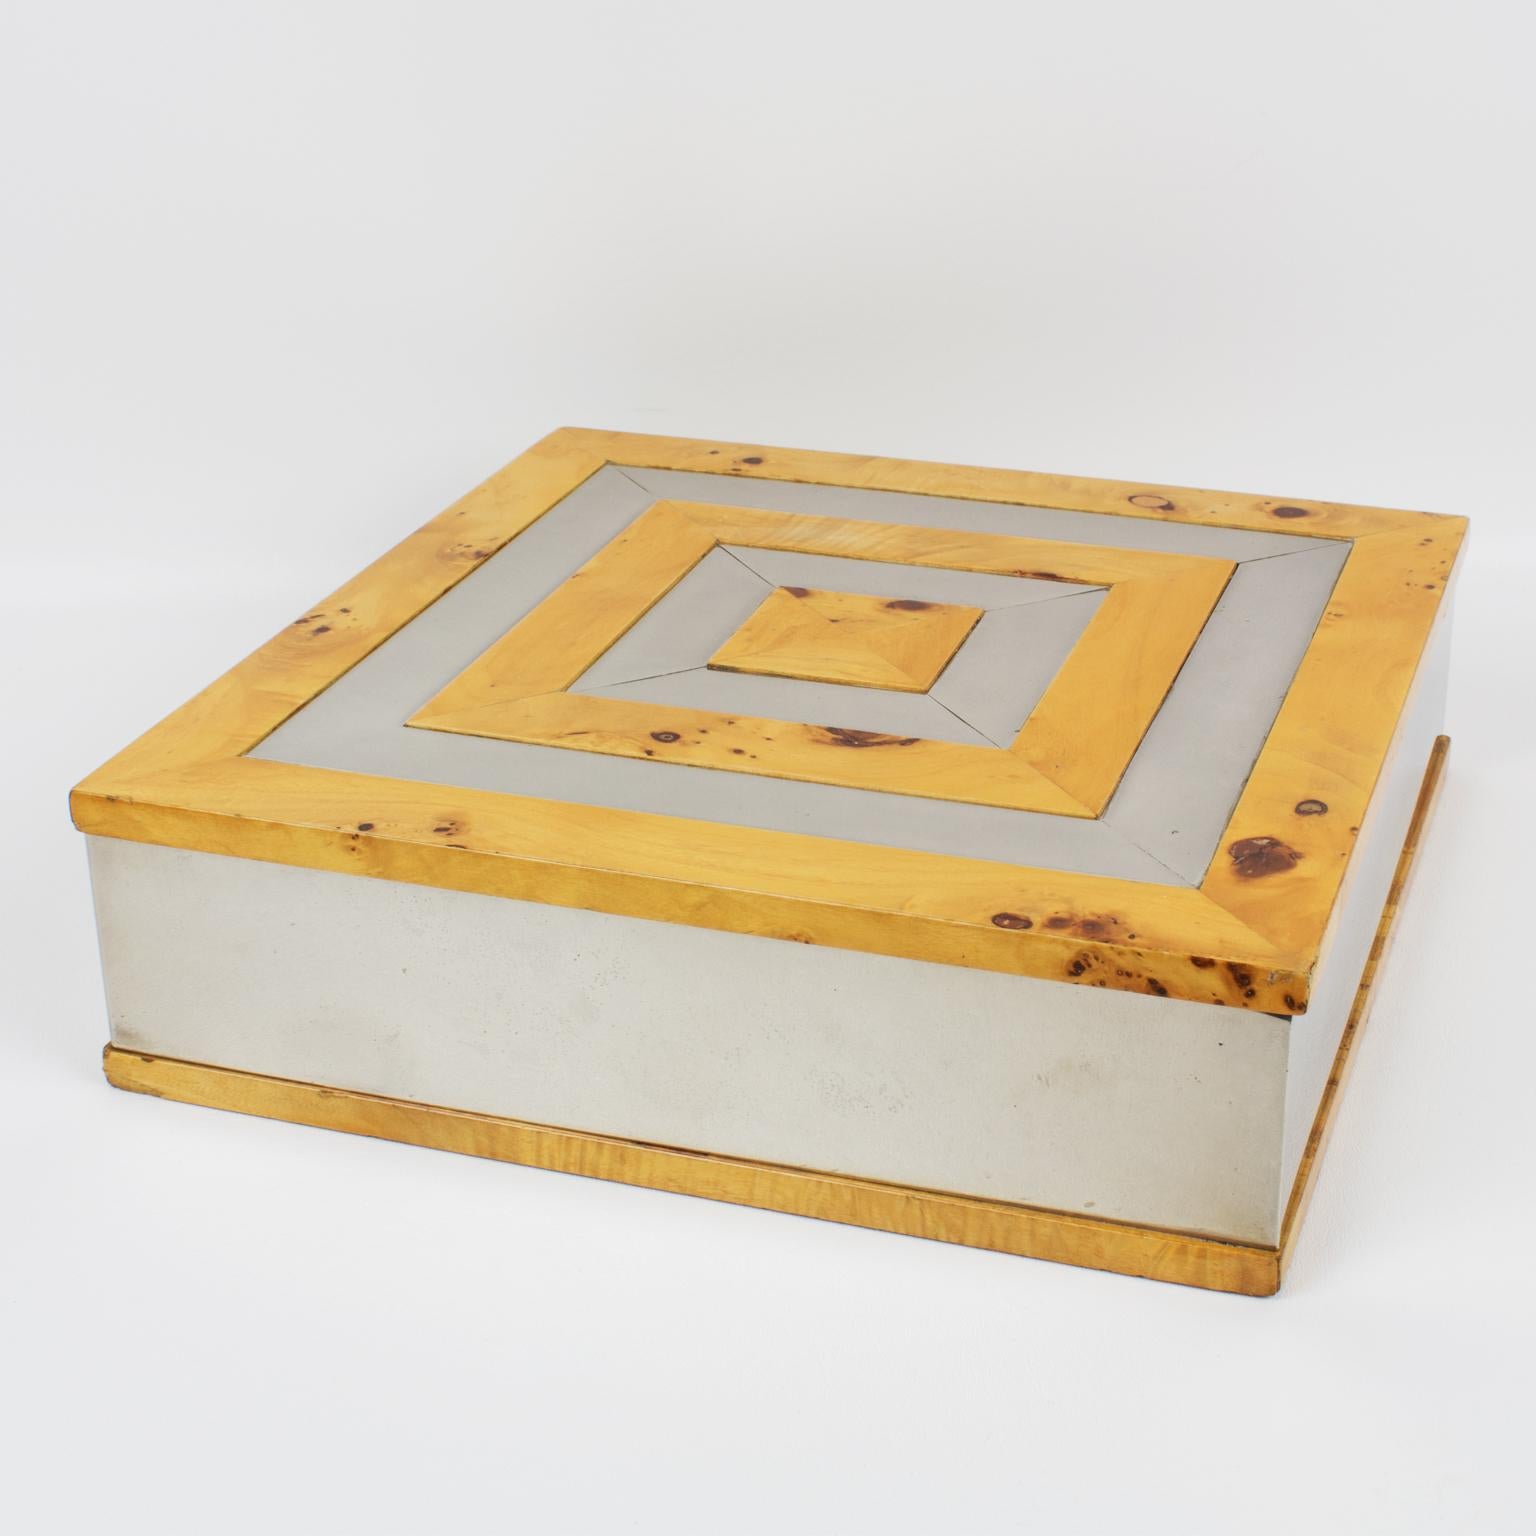 Tommaso Barbi designed this great-looking original decorative box in Italy in the 1960s. The modernist design boasts a square shape with chromed metal and burl birch wood geometric marquetry on the lid. The inside is in burl wood as well, with